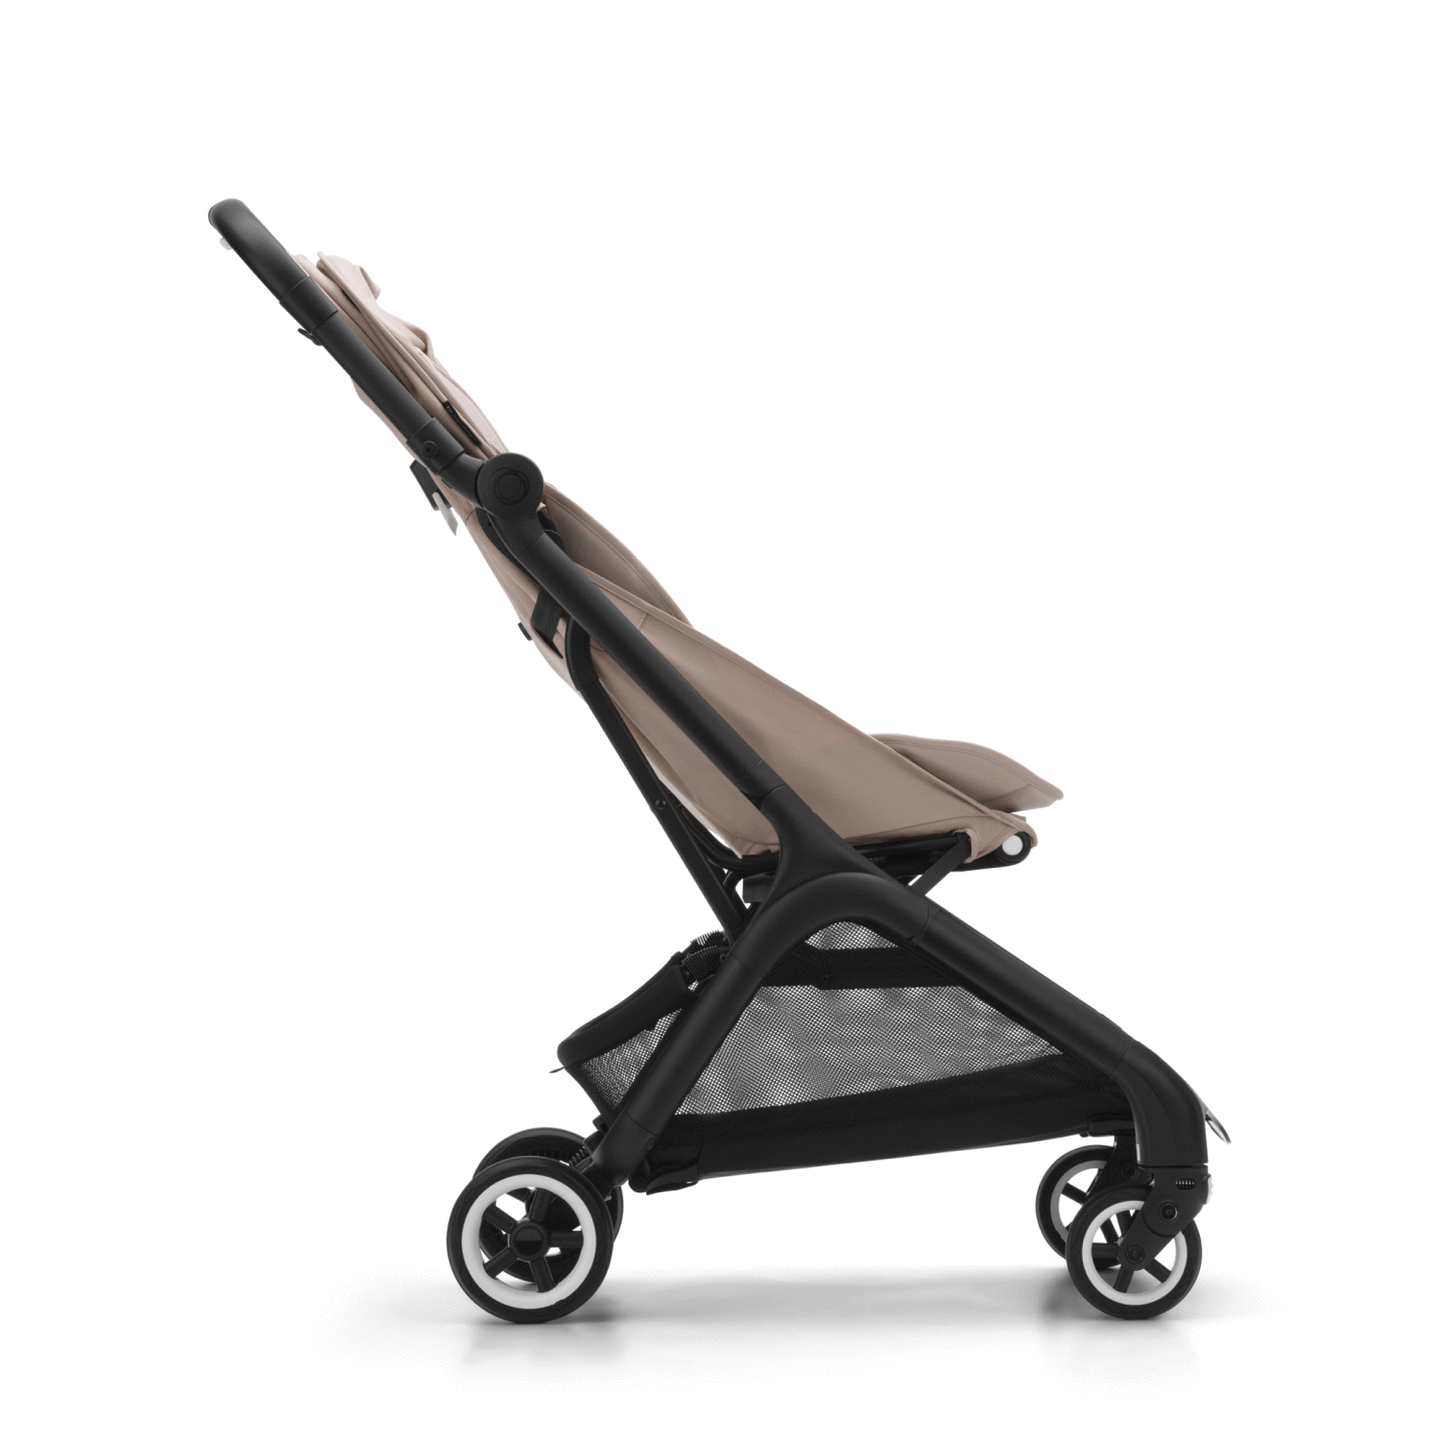 A sequence of images showing the Bugaboo Butterfly stroller in motion as it folds down into an ultra-compact package.